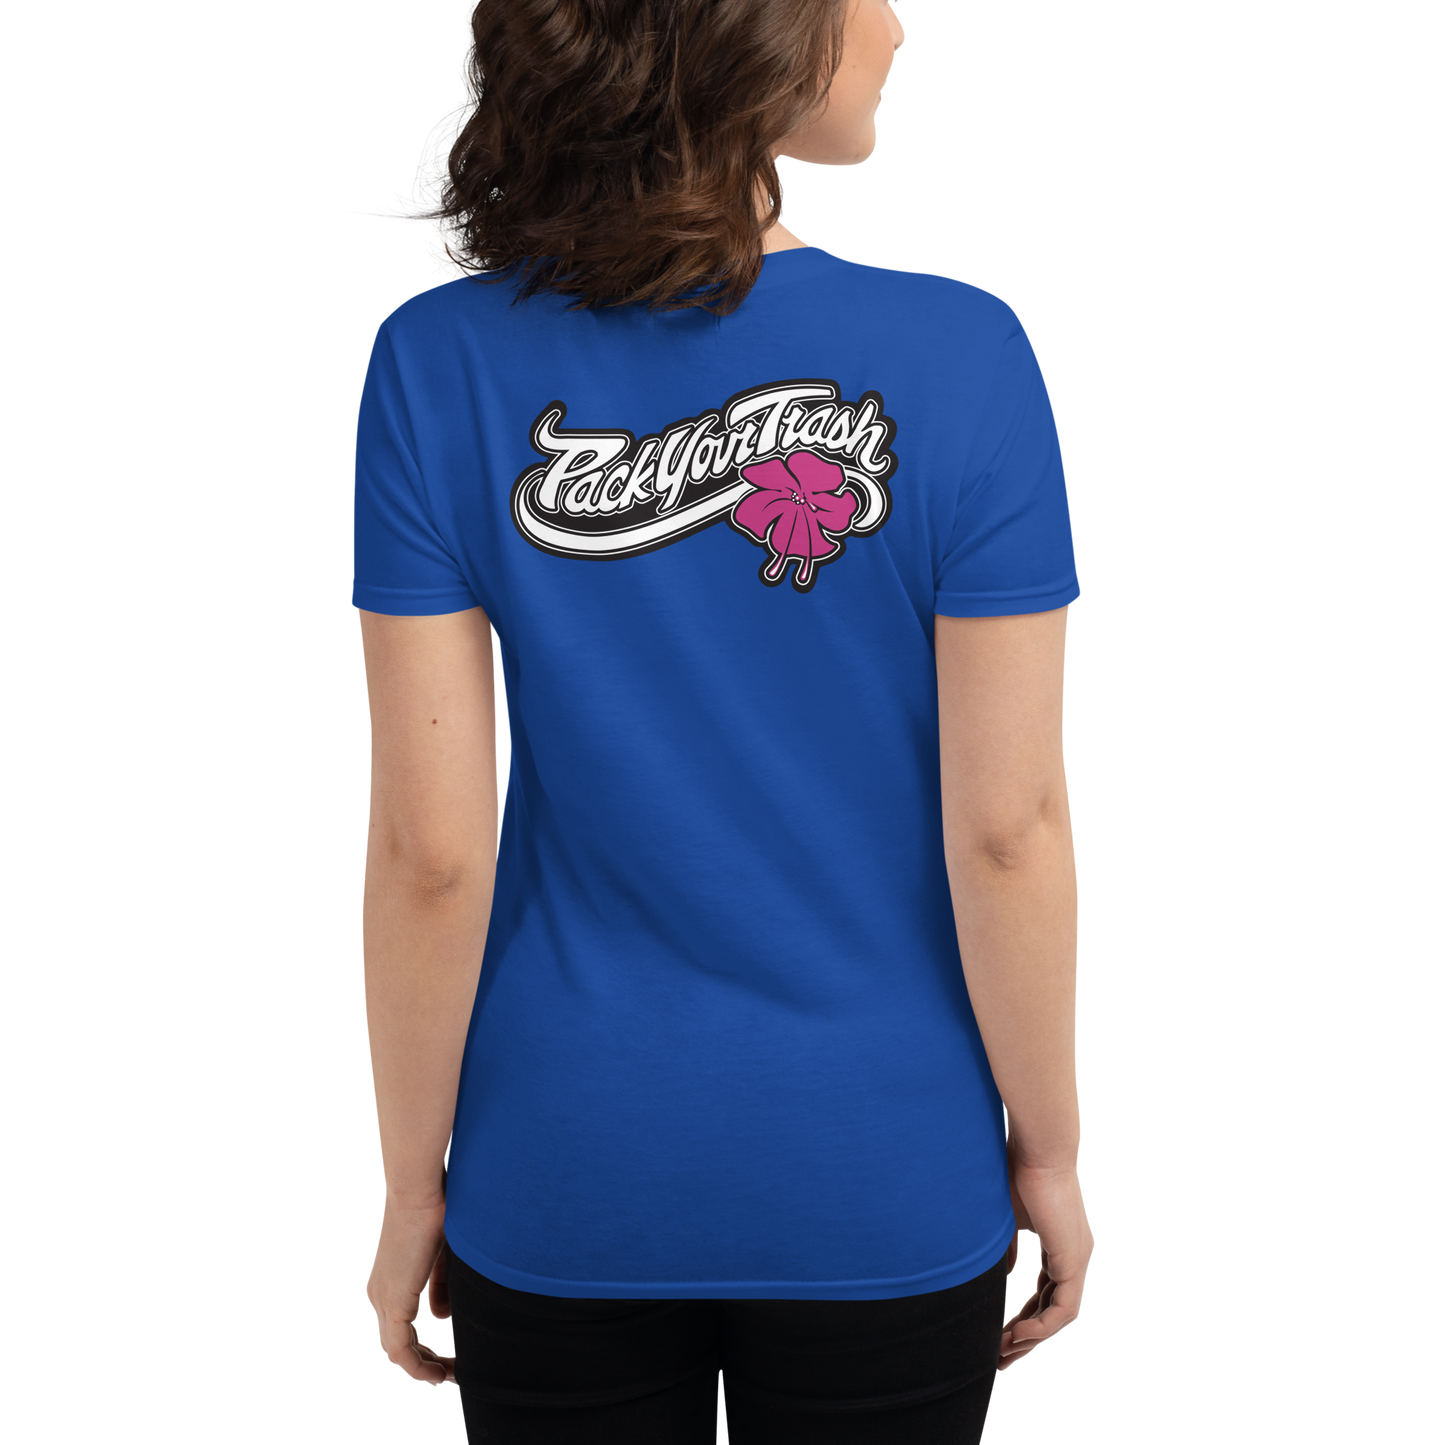 Pack Your Trash - Hibiscus Color - Women's short sleeve t-shirt